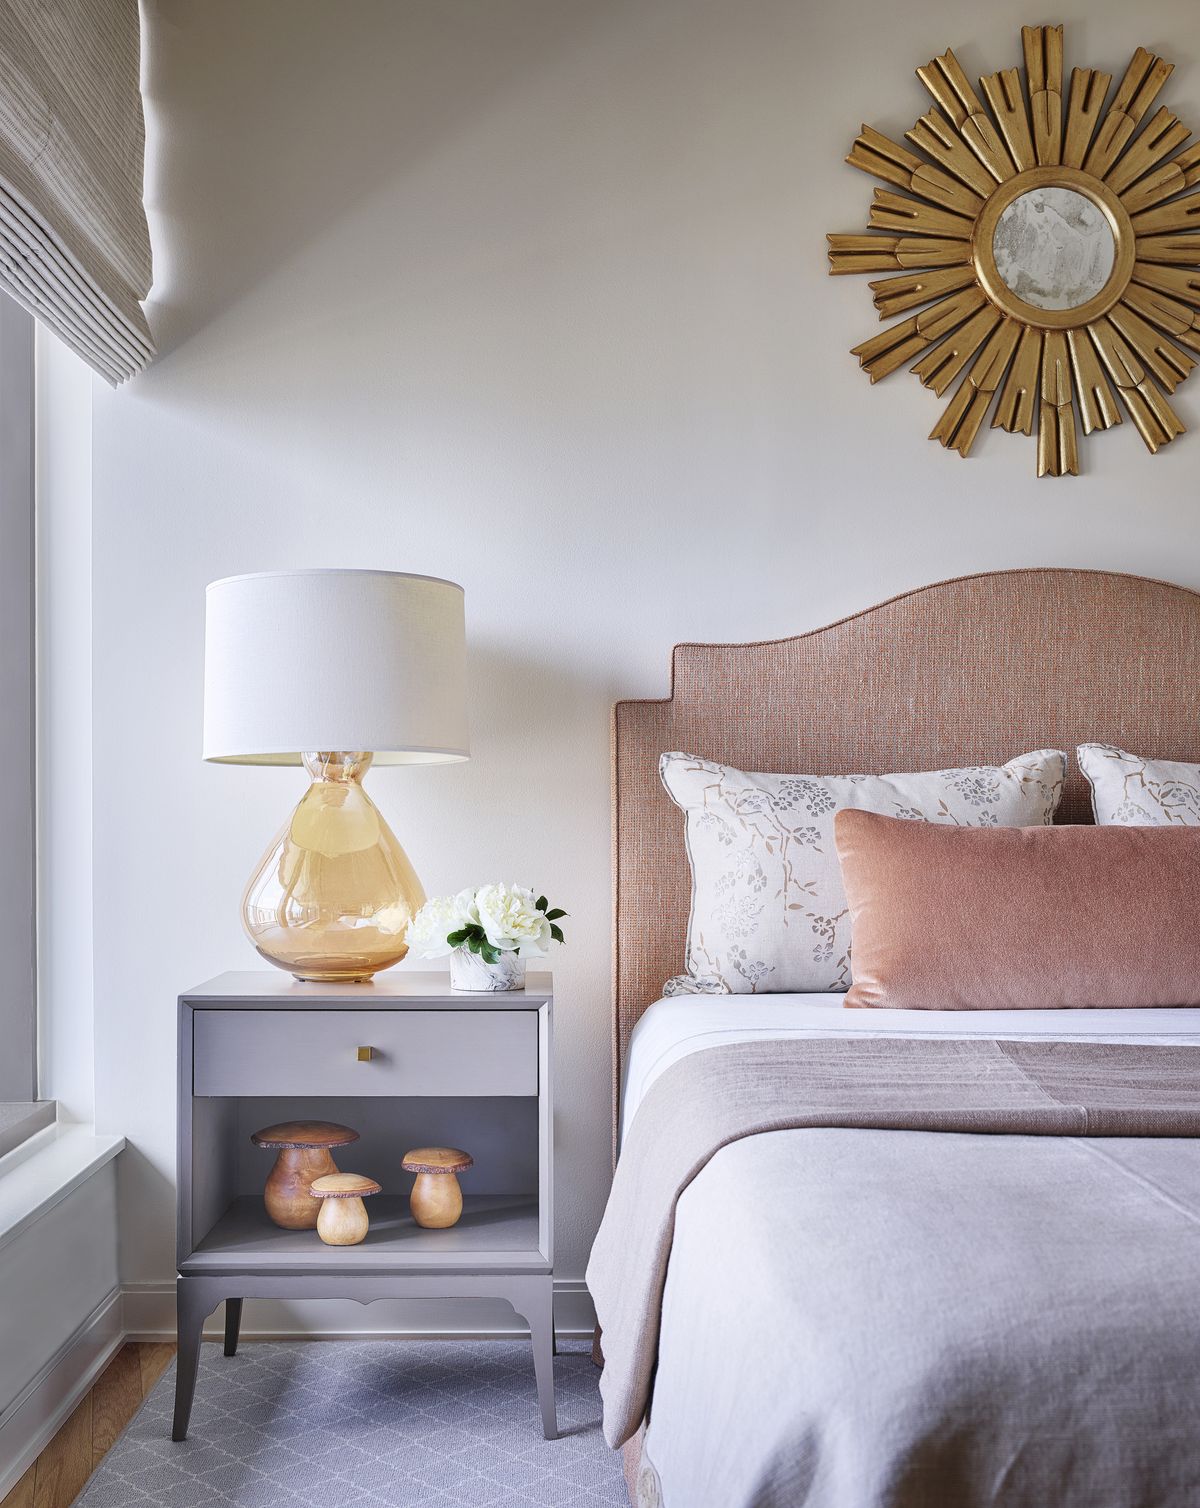 12 above the bed decor ideas that will fill that negative space instantly